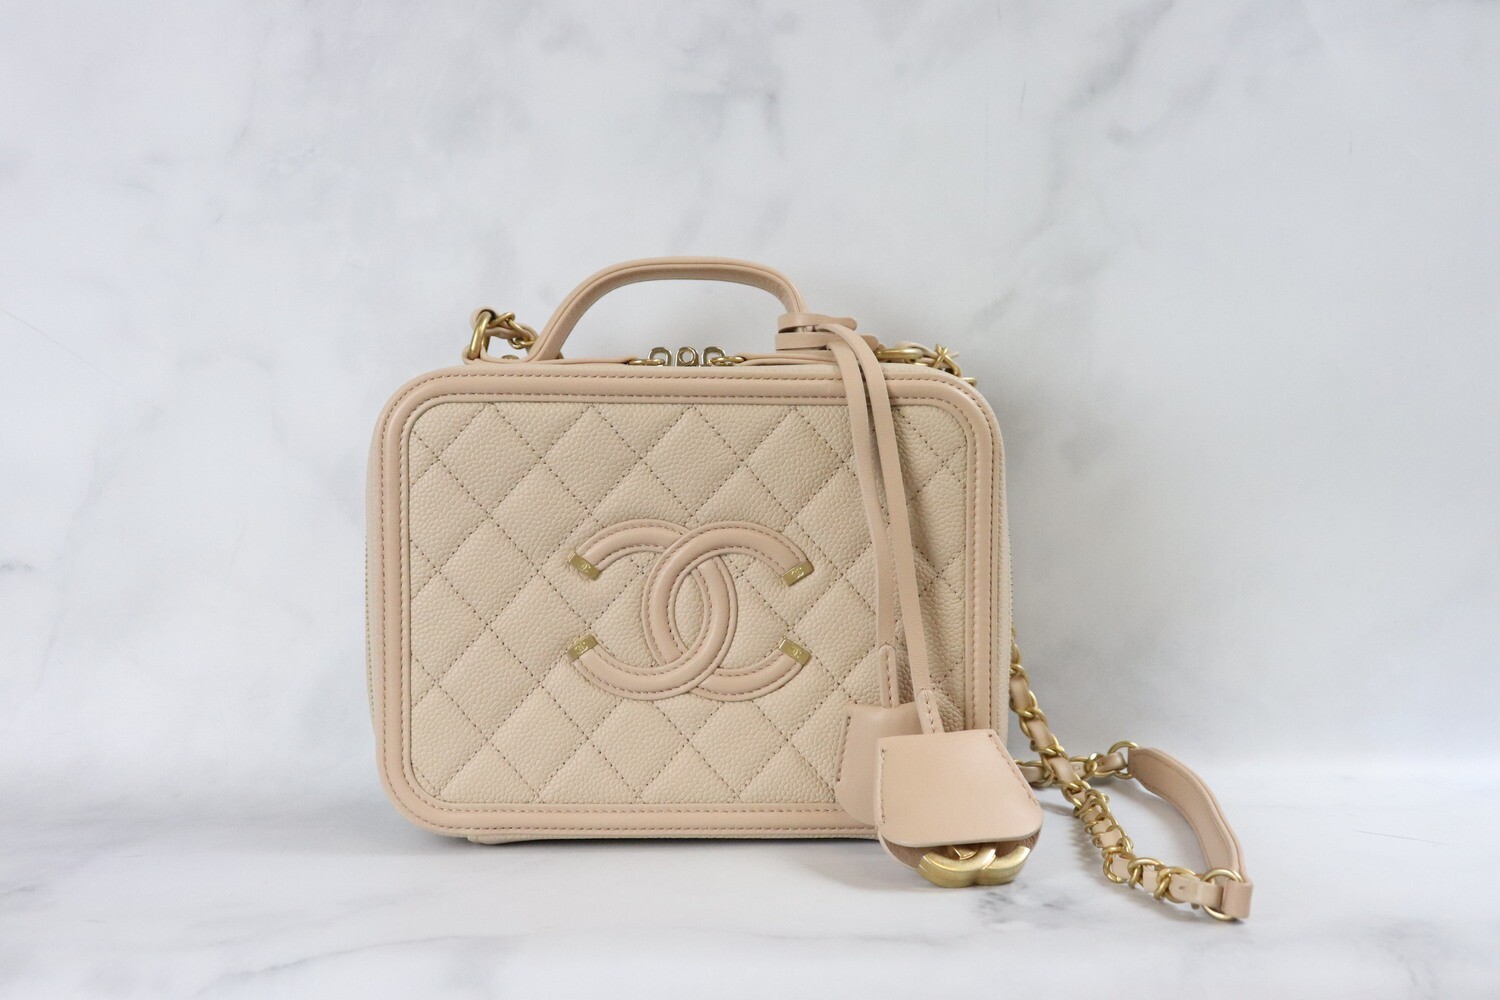 Chanel Filigree Vanity Case, Medium, Beige Caviar Leather, Brushed Gold  Hardware, Preowned with Box